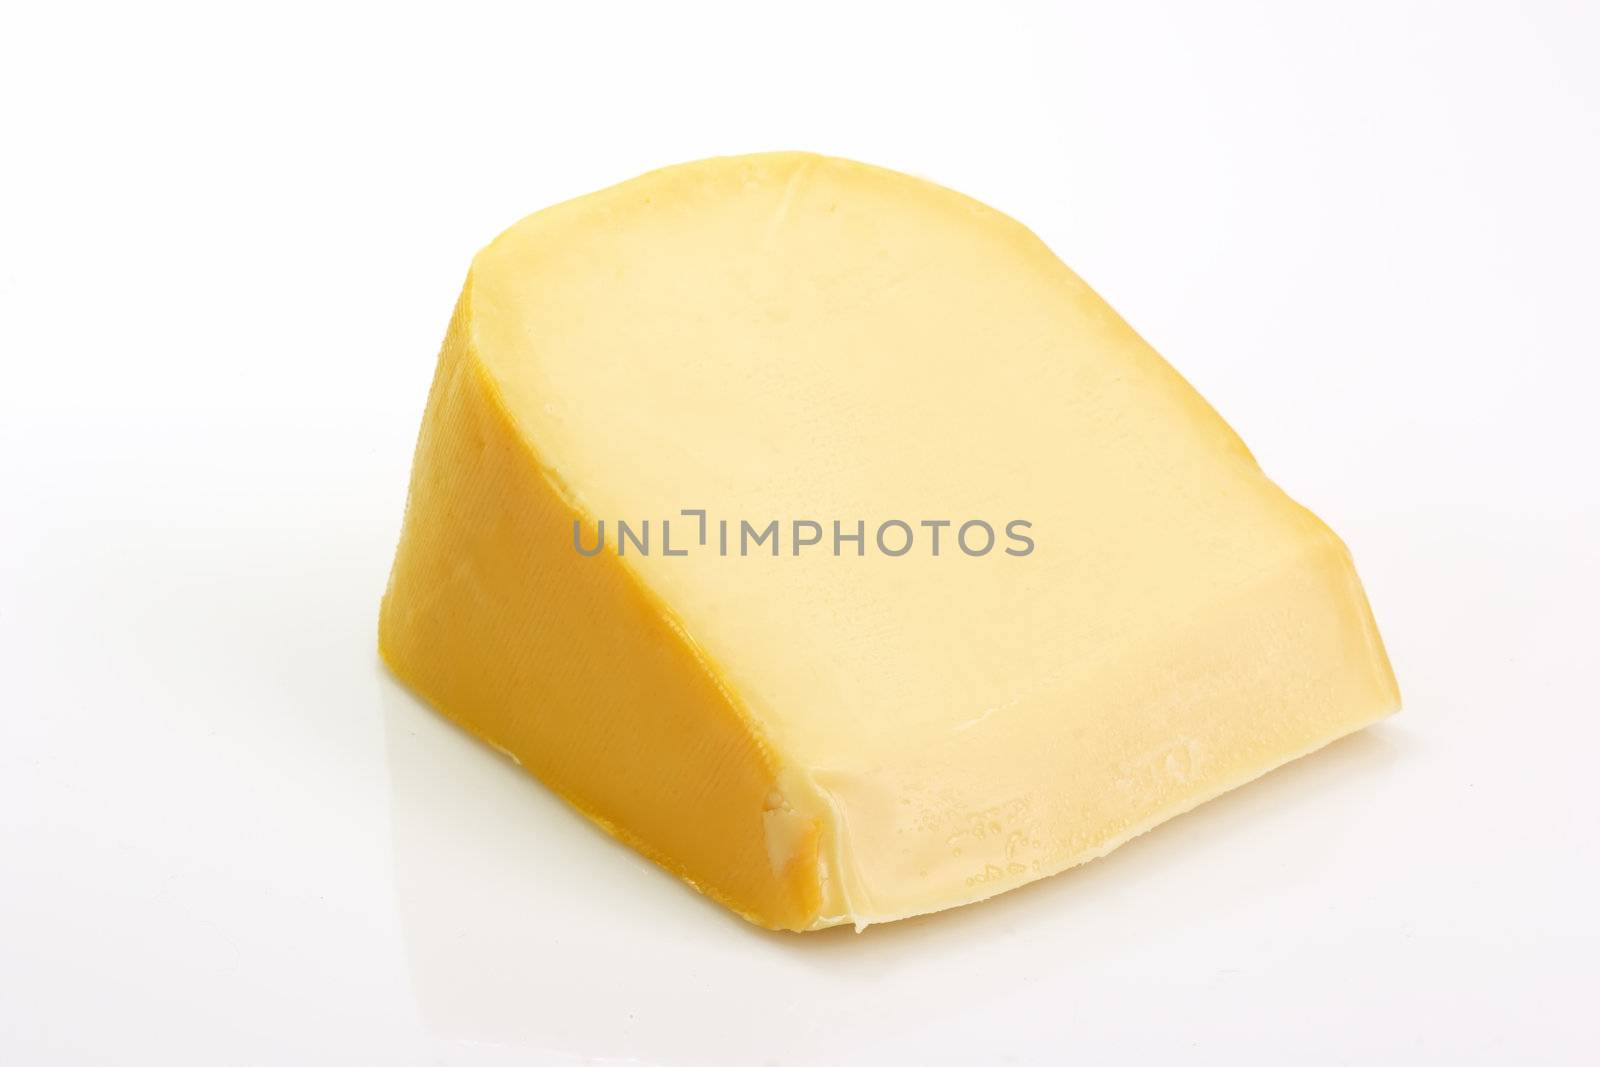 A big chunk of gouda cheese on bright background
